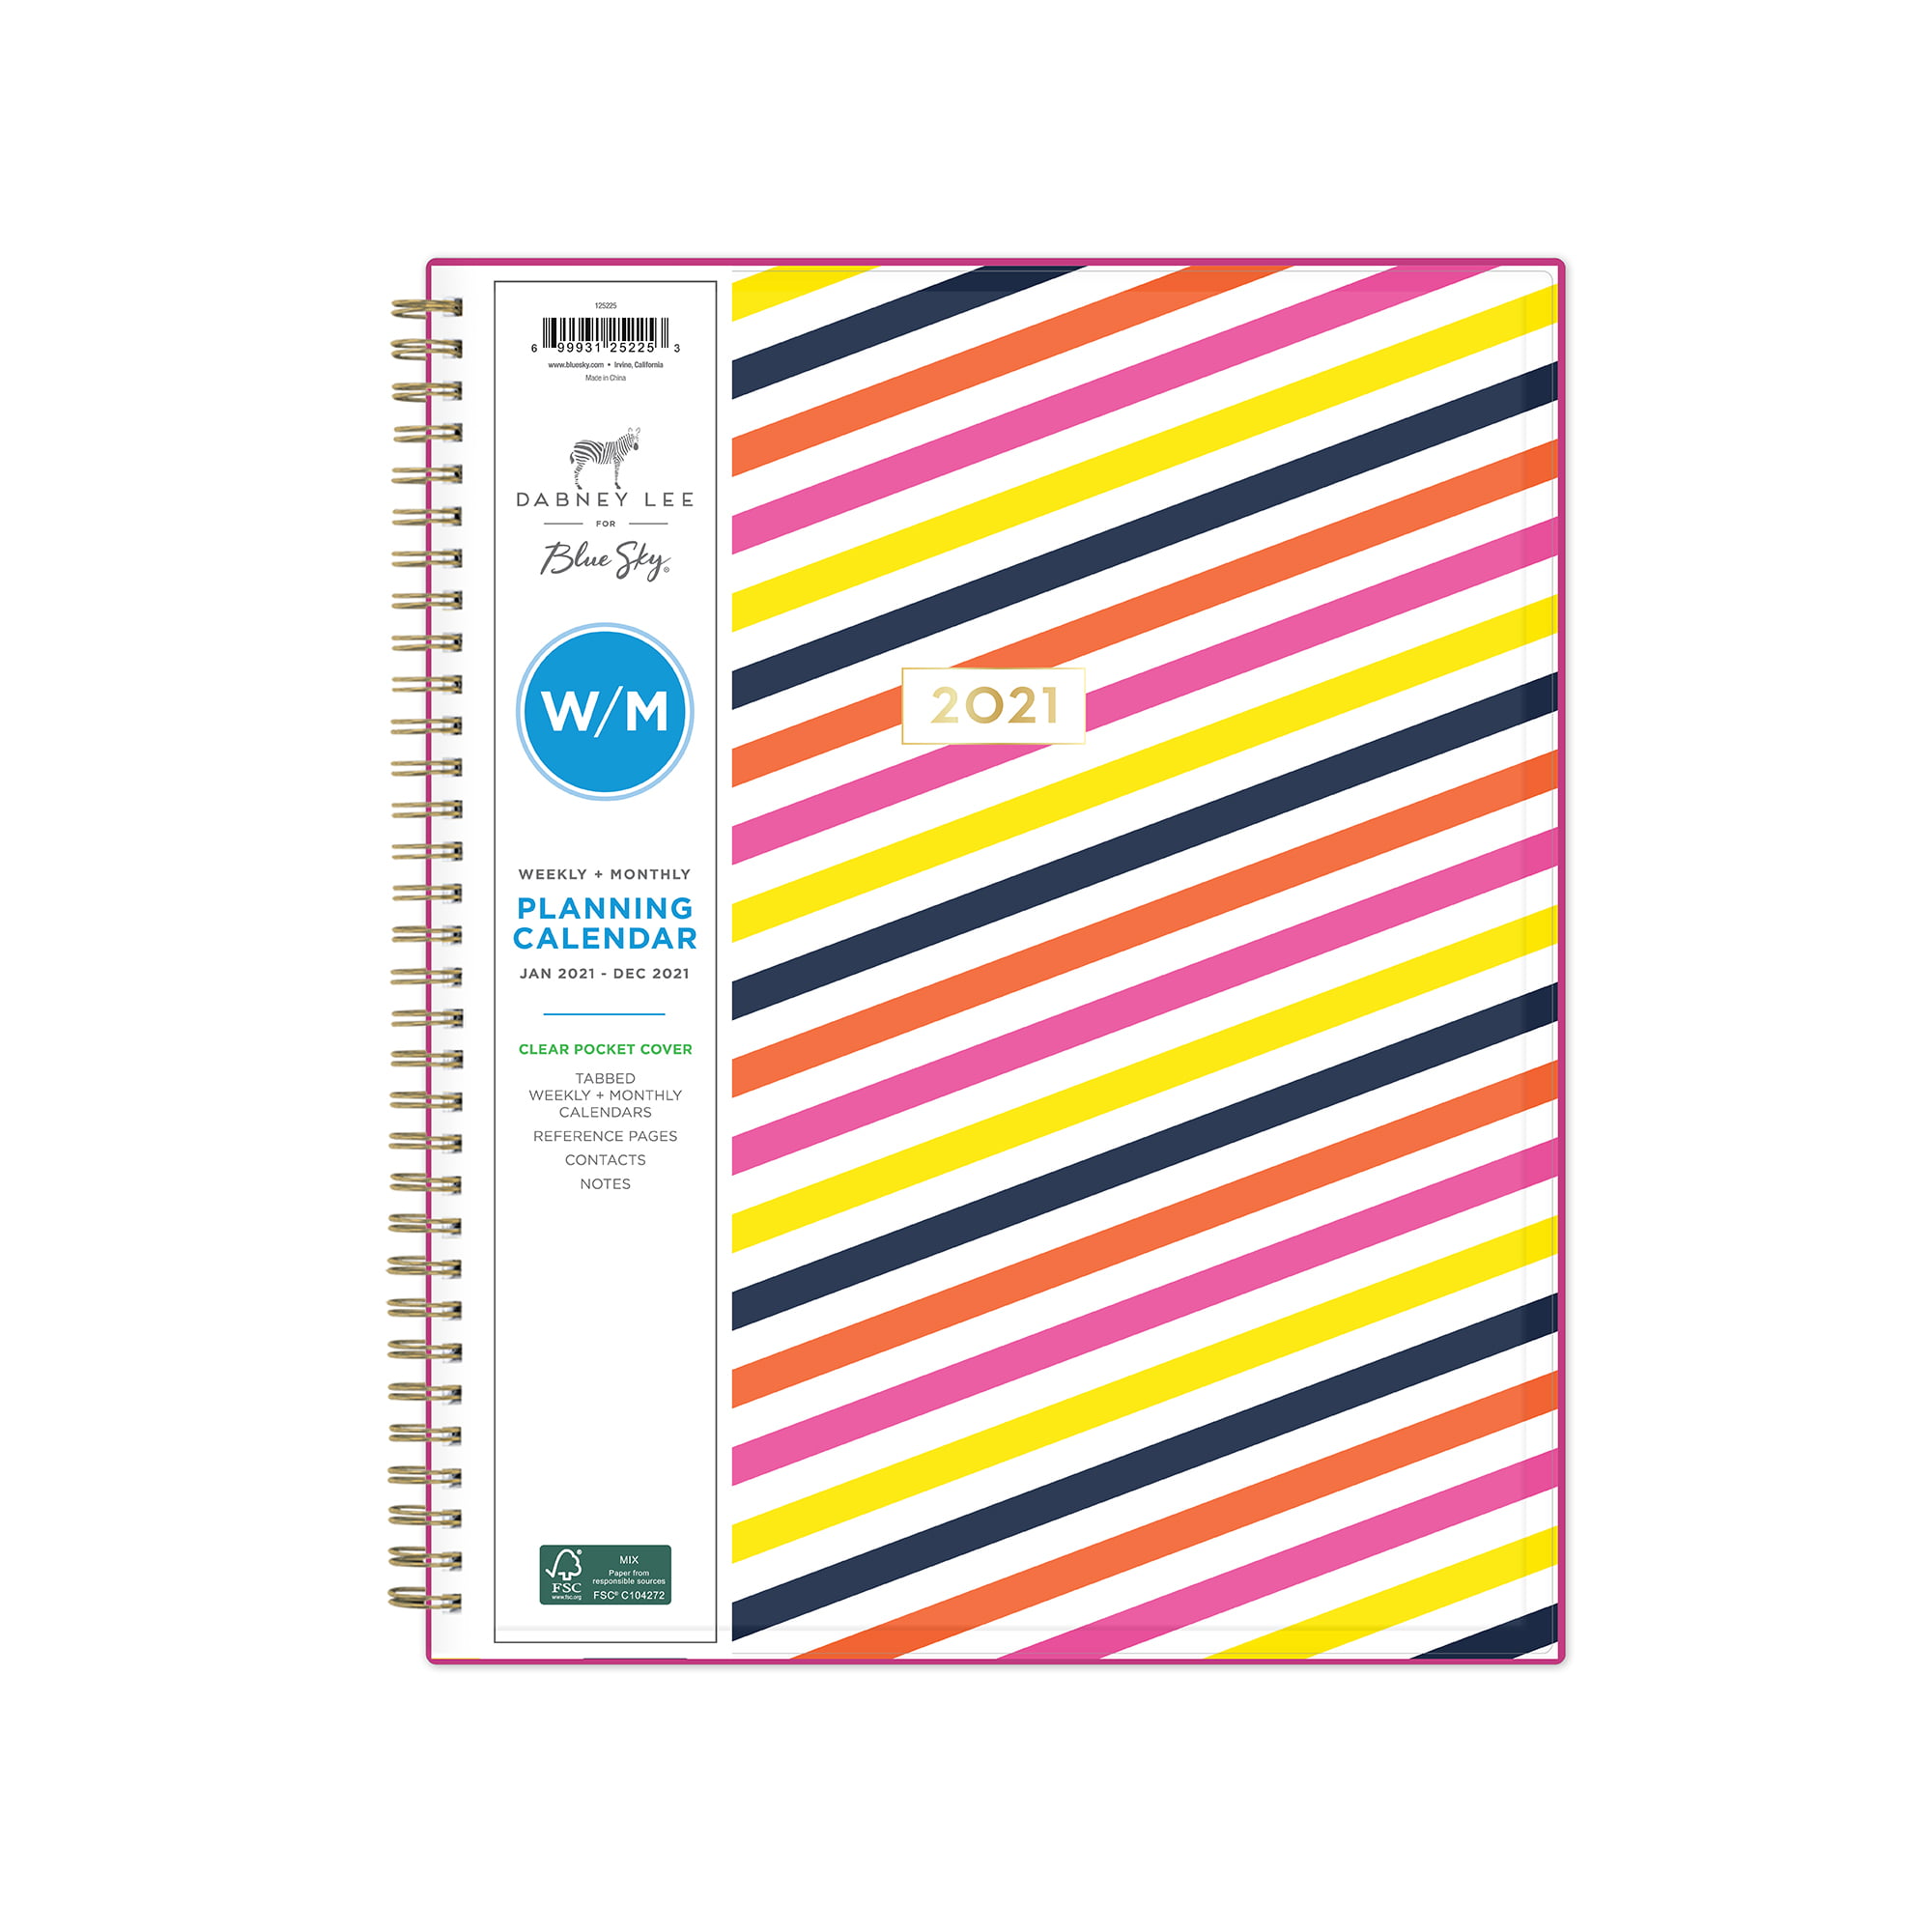 Ollie Dabney Lee for Blue Sky 2018-2019 Academic Year Weekly & Monthly Planner 8.5 x 11 Twin-Wire Binding Flexible Cover 